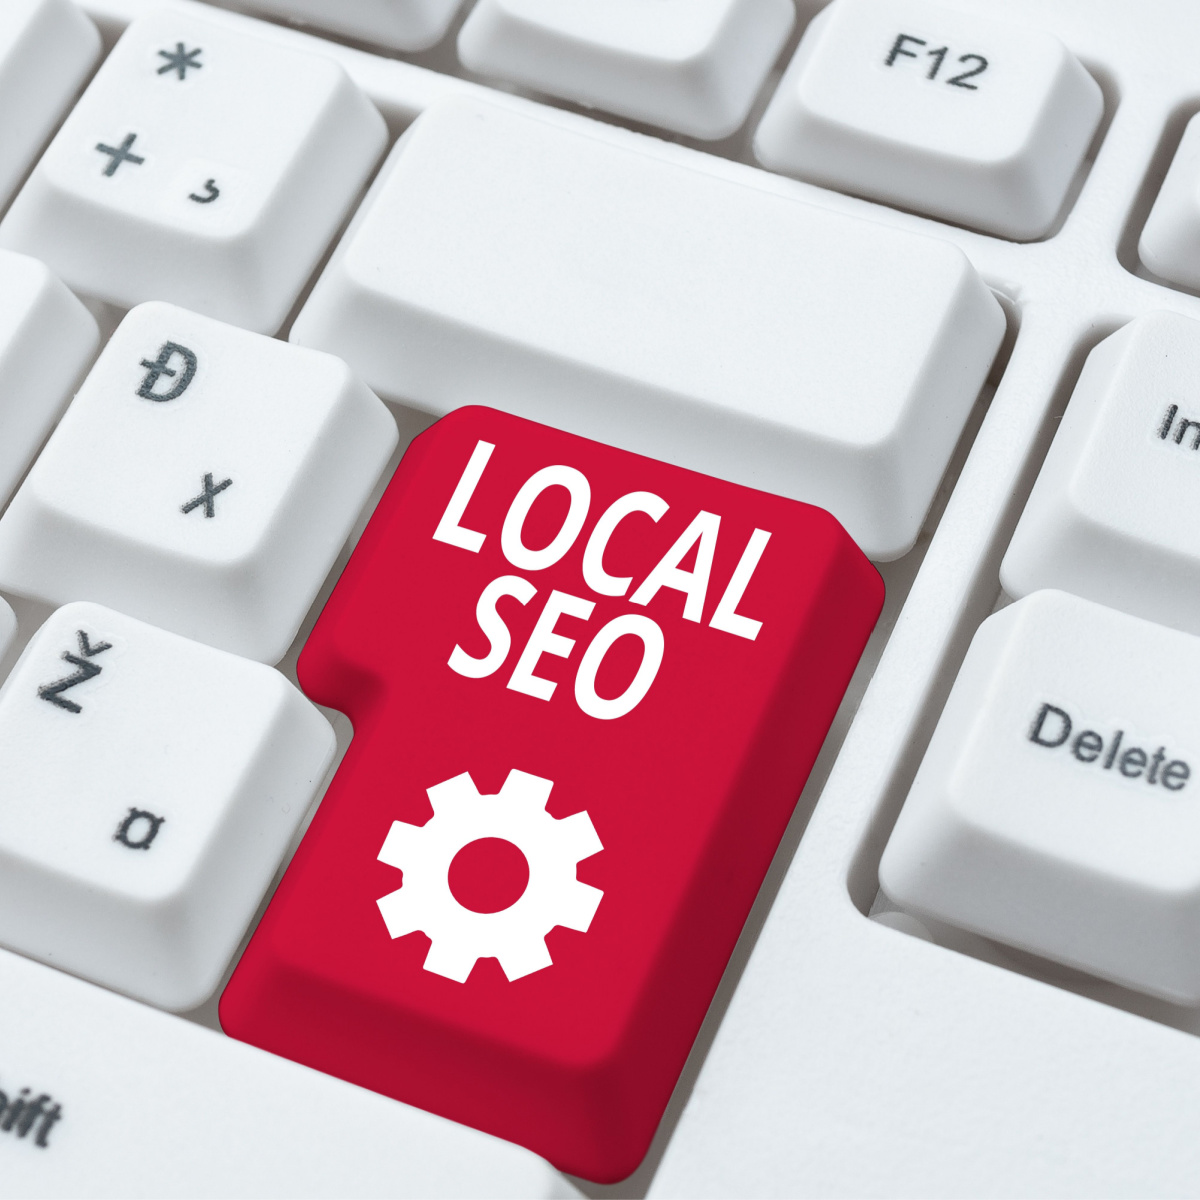 Local SEO Mistakes you should avoid for your Houston digital marketing campaign.